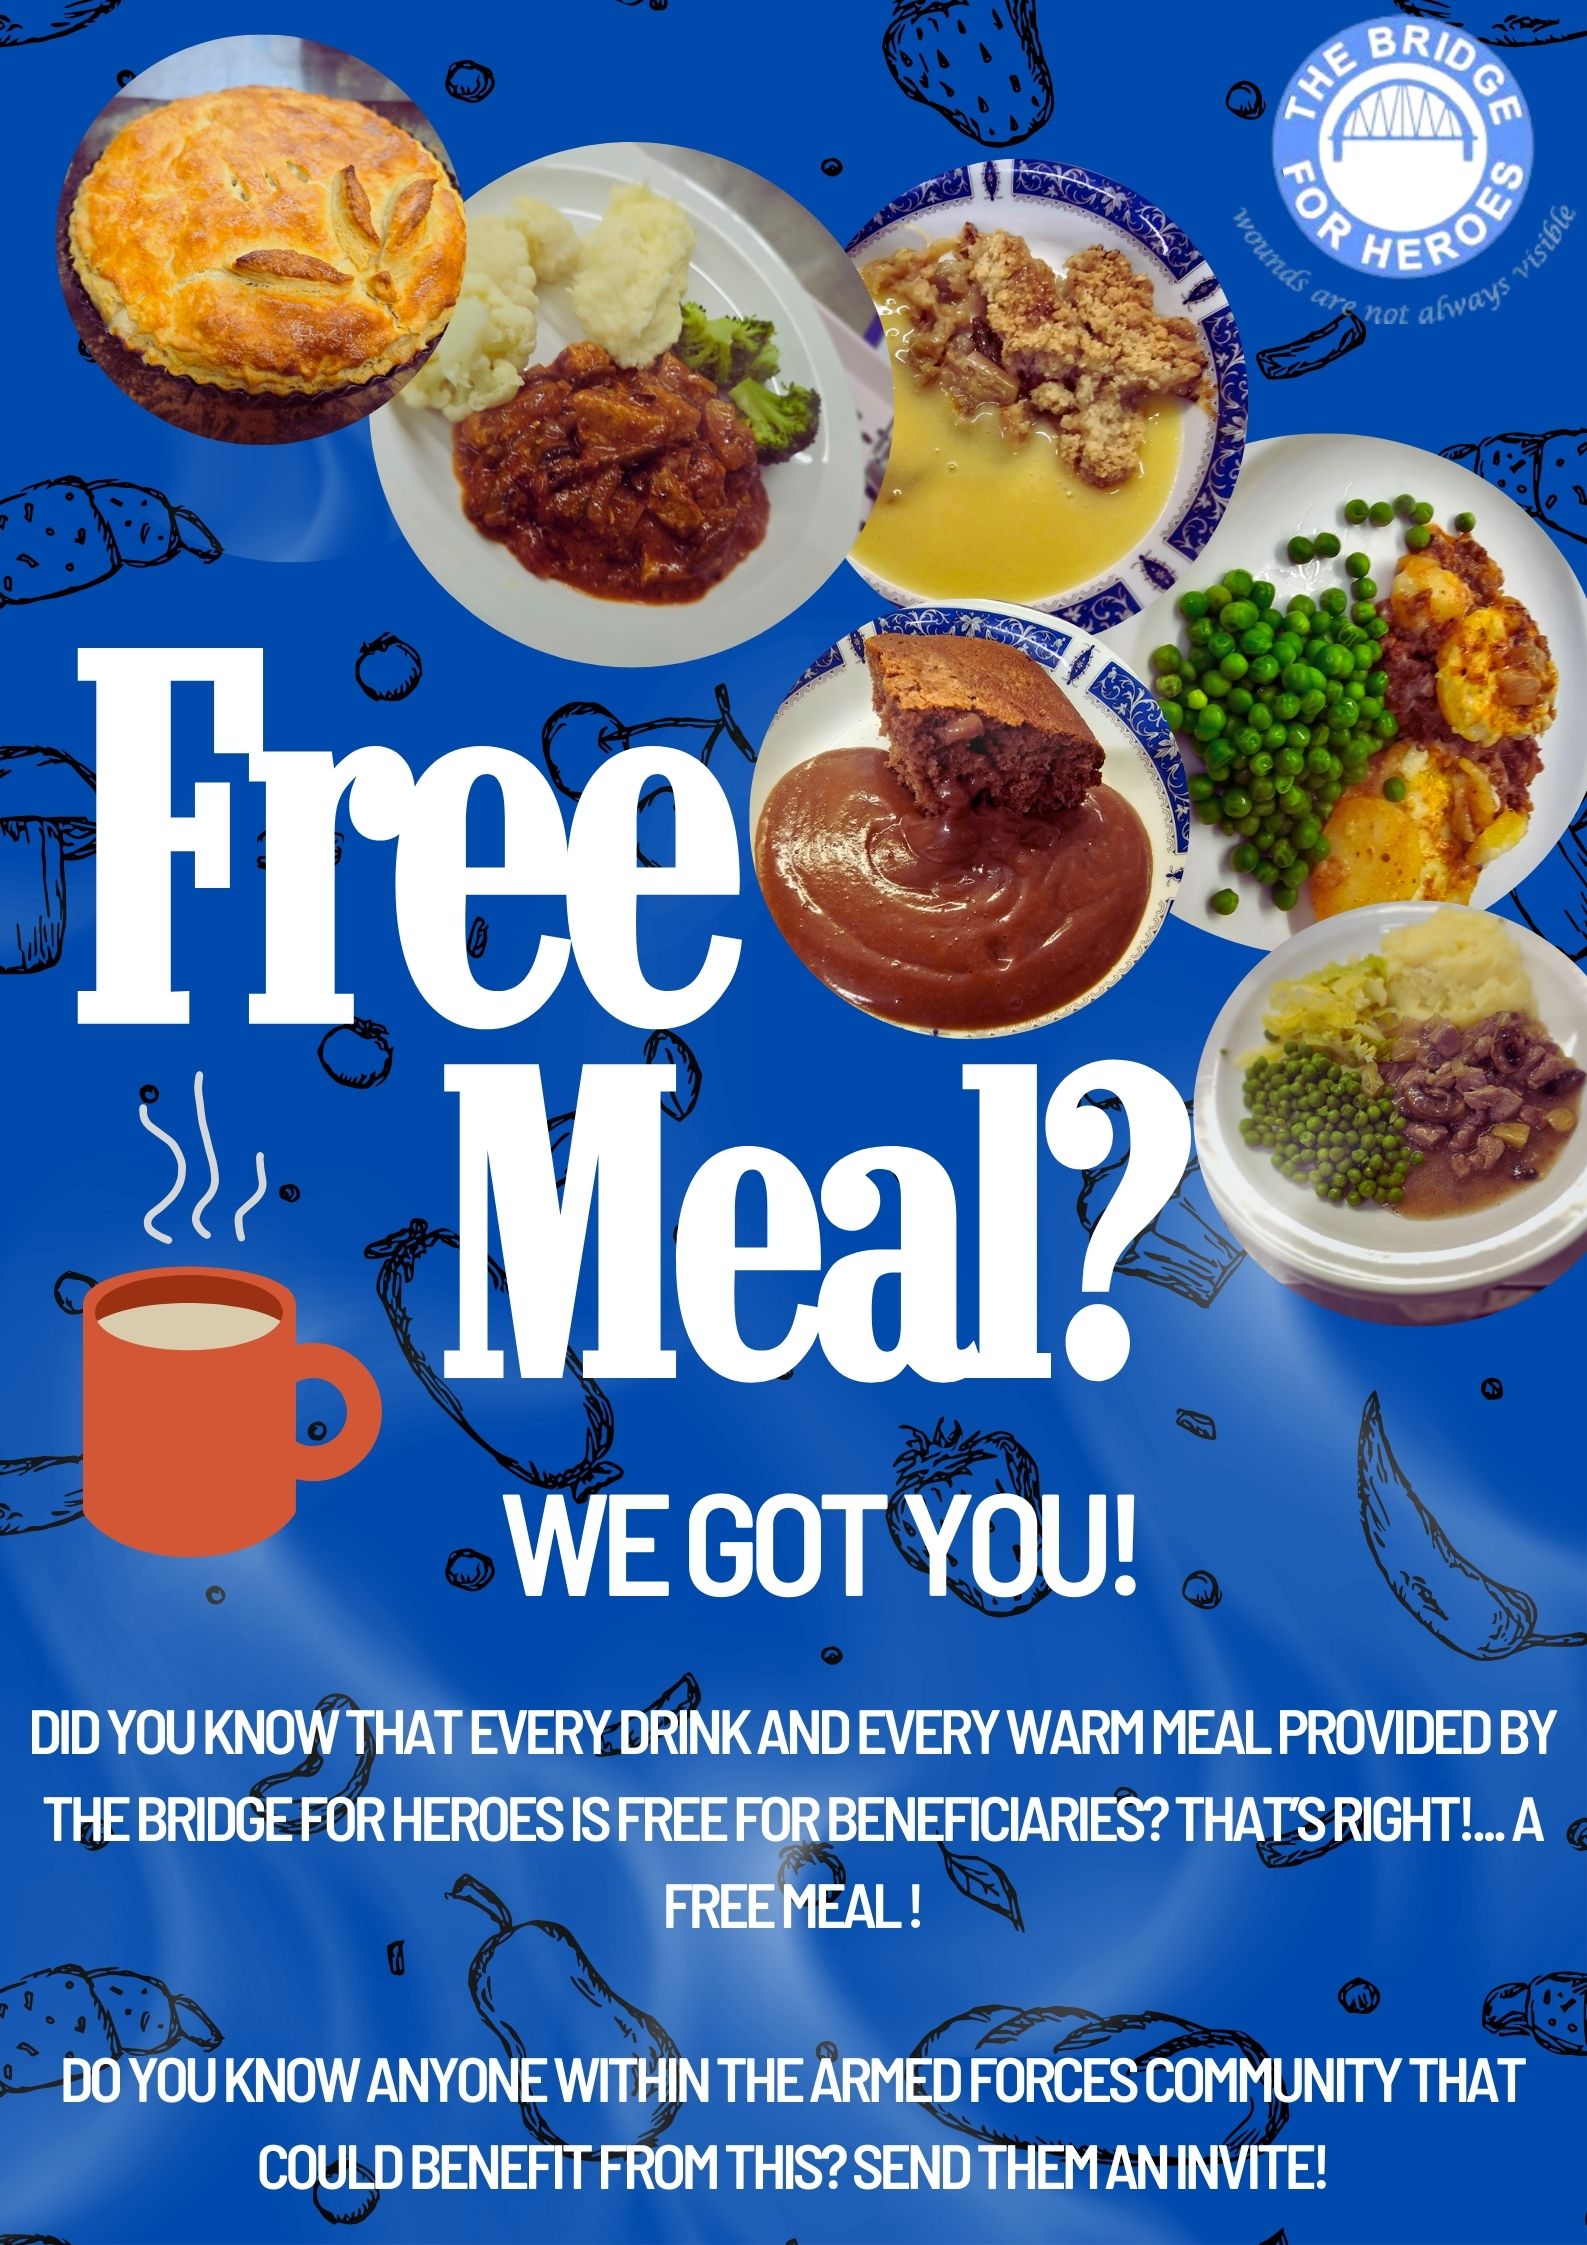 Free Meals